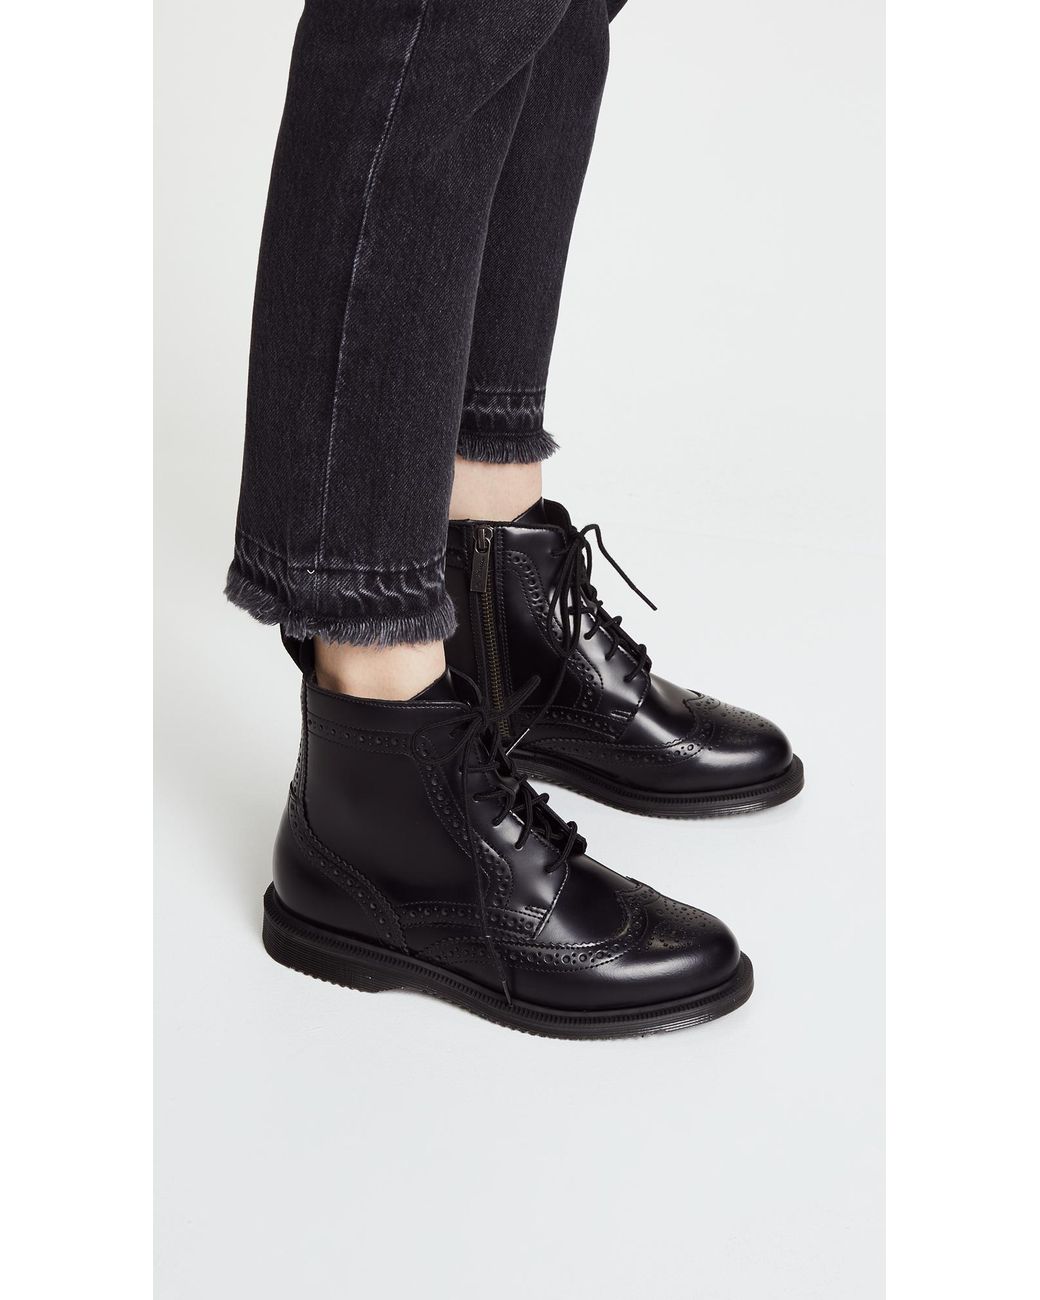 Dr. Martens Delphine 8-eye Brogue Boot in Black | Lyst Canada